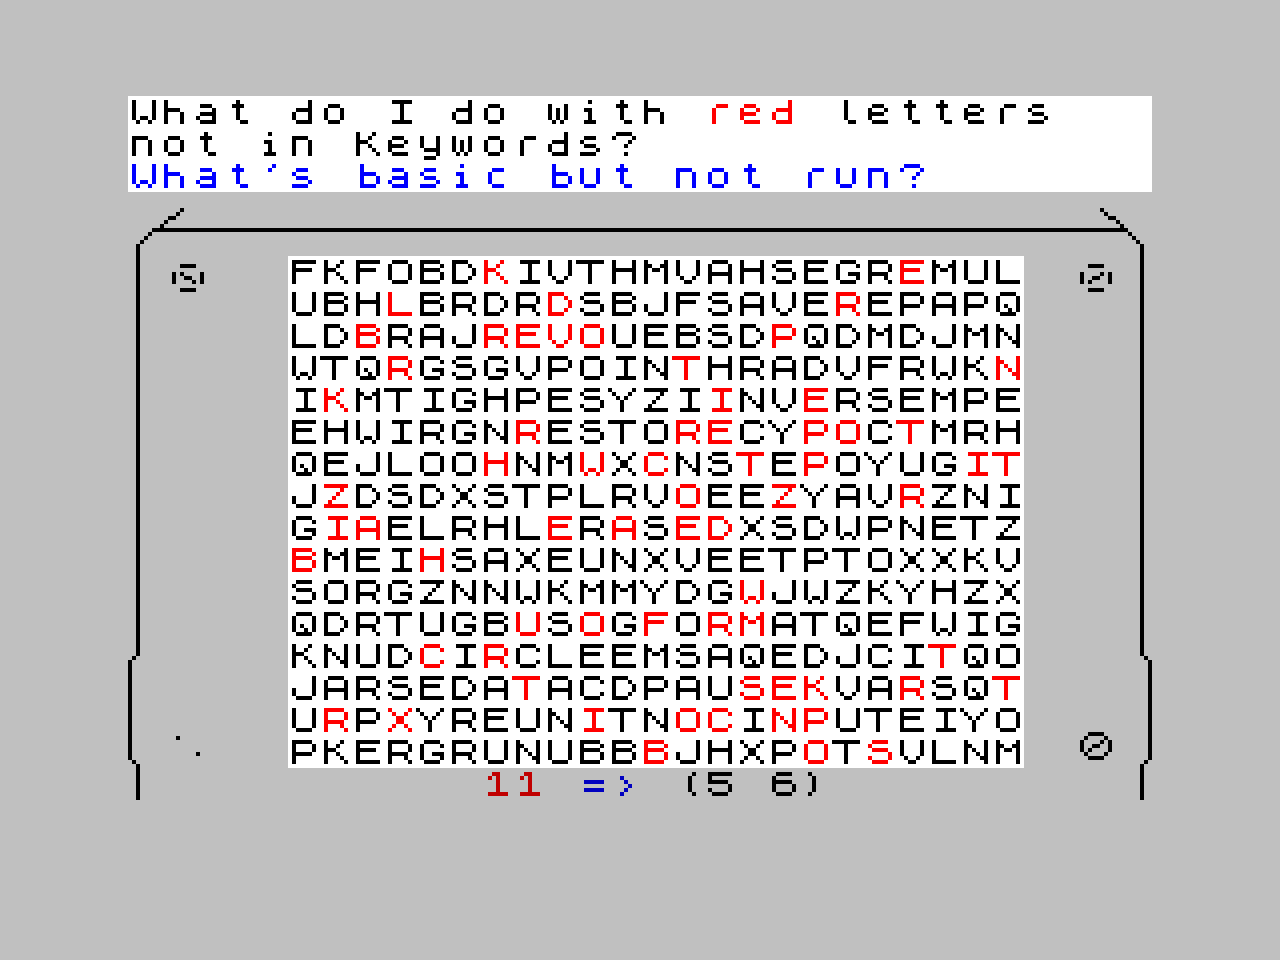 What do I do with the red letters not in Keywords? What's basic but not run? 11 => (5 6)